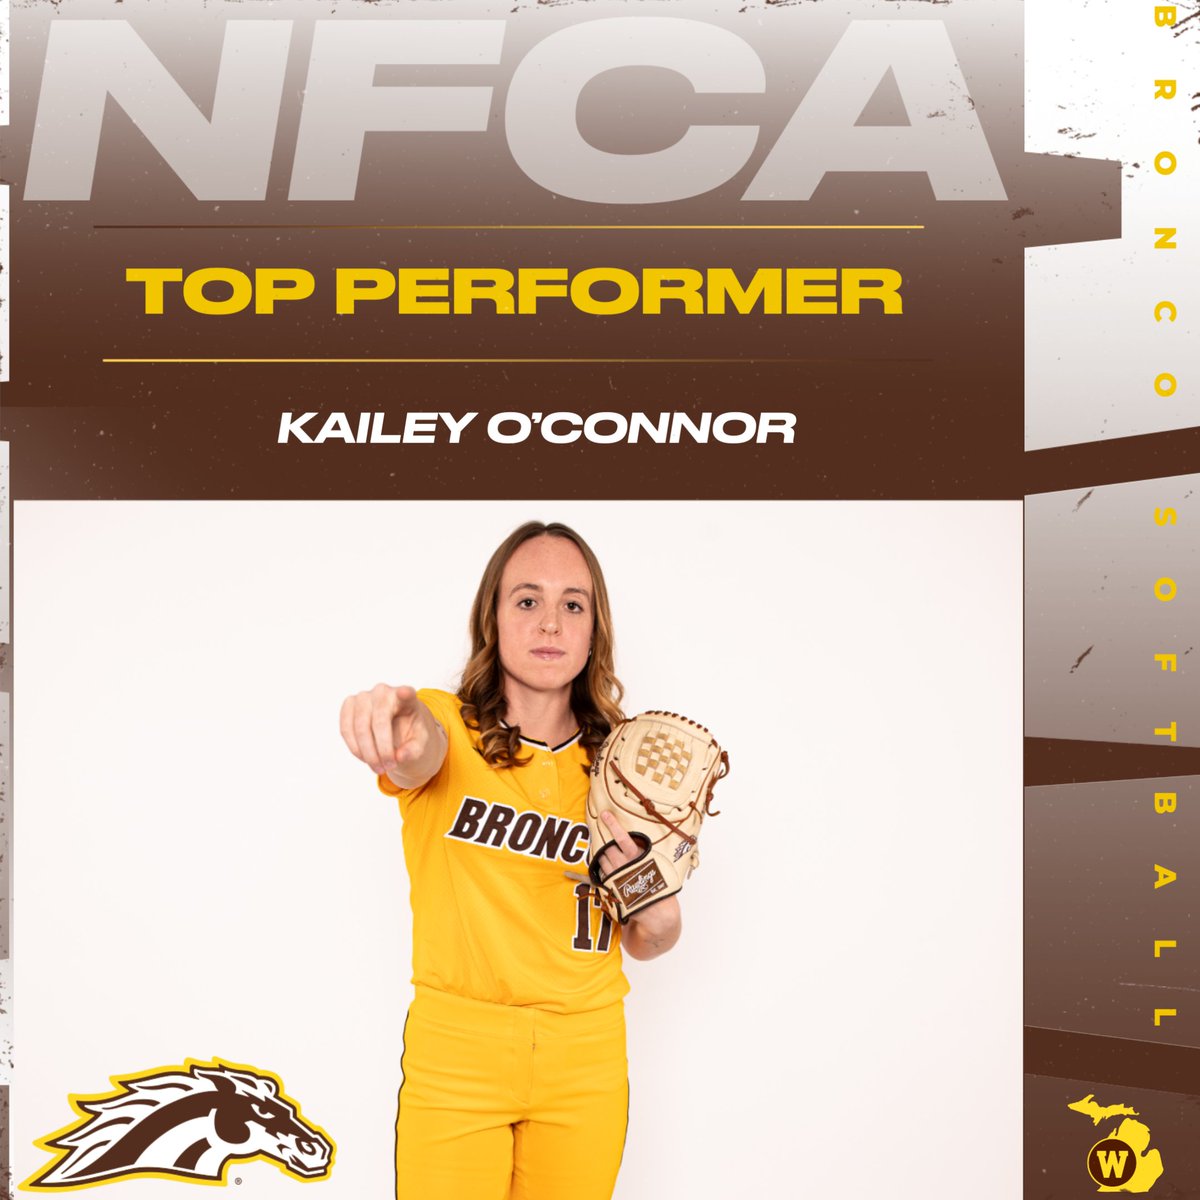 Congratulations to Kailey O’Connor on earning a NFCA Top Performer nod! 📰bit.ly/3UbgNlZ #BroncosReign